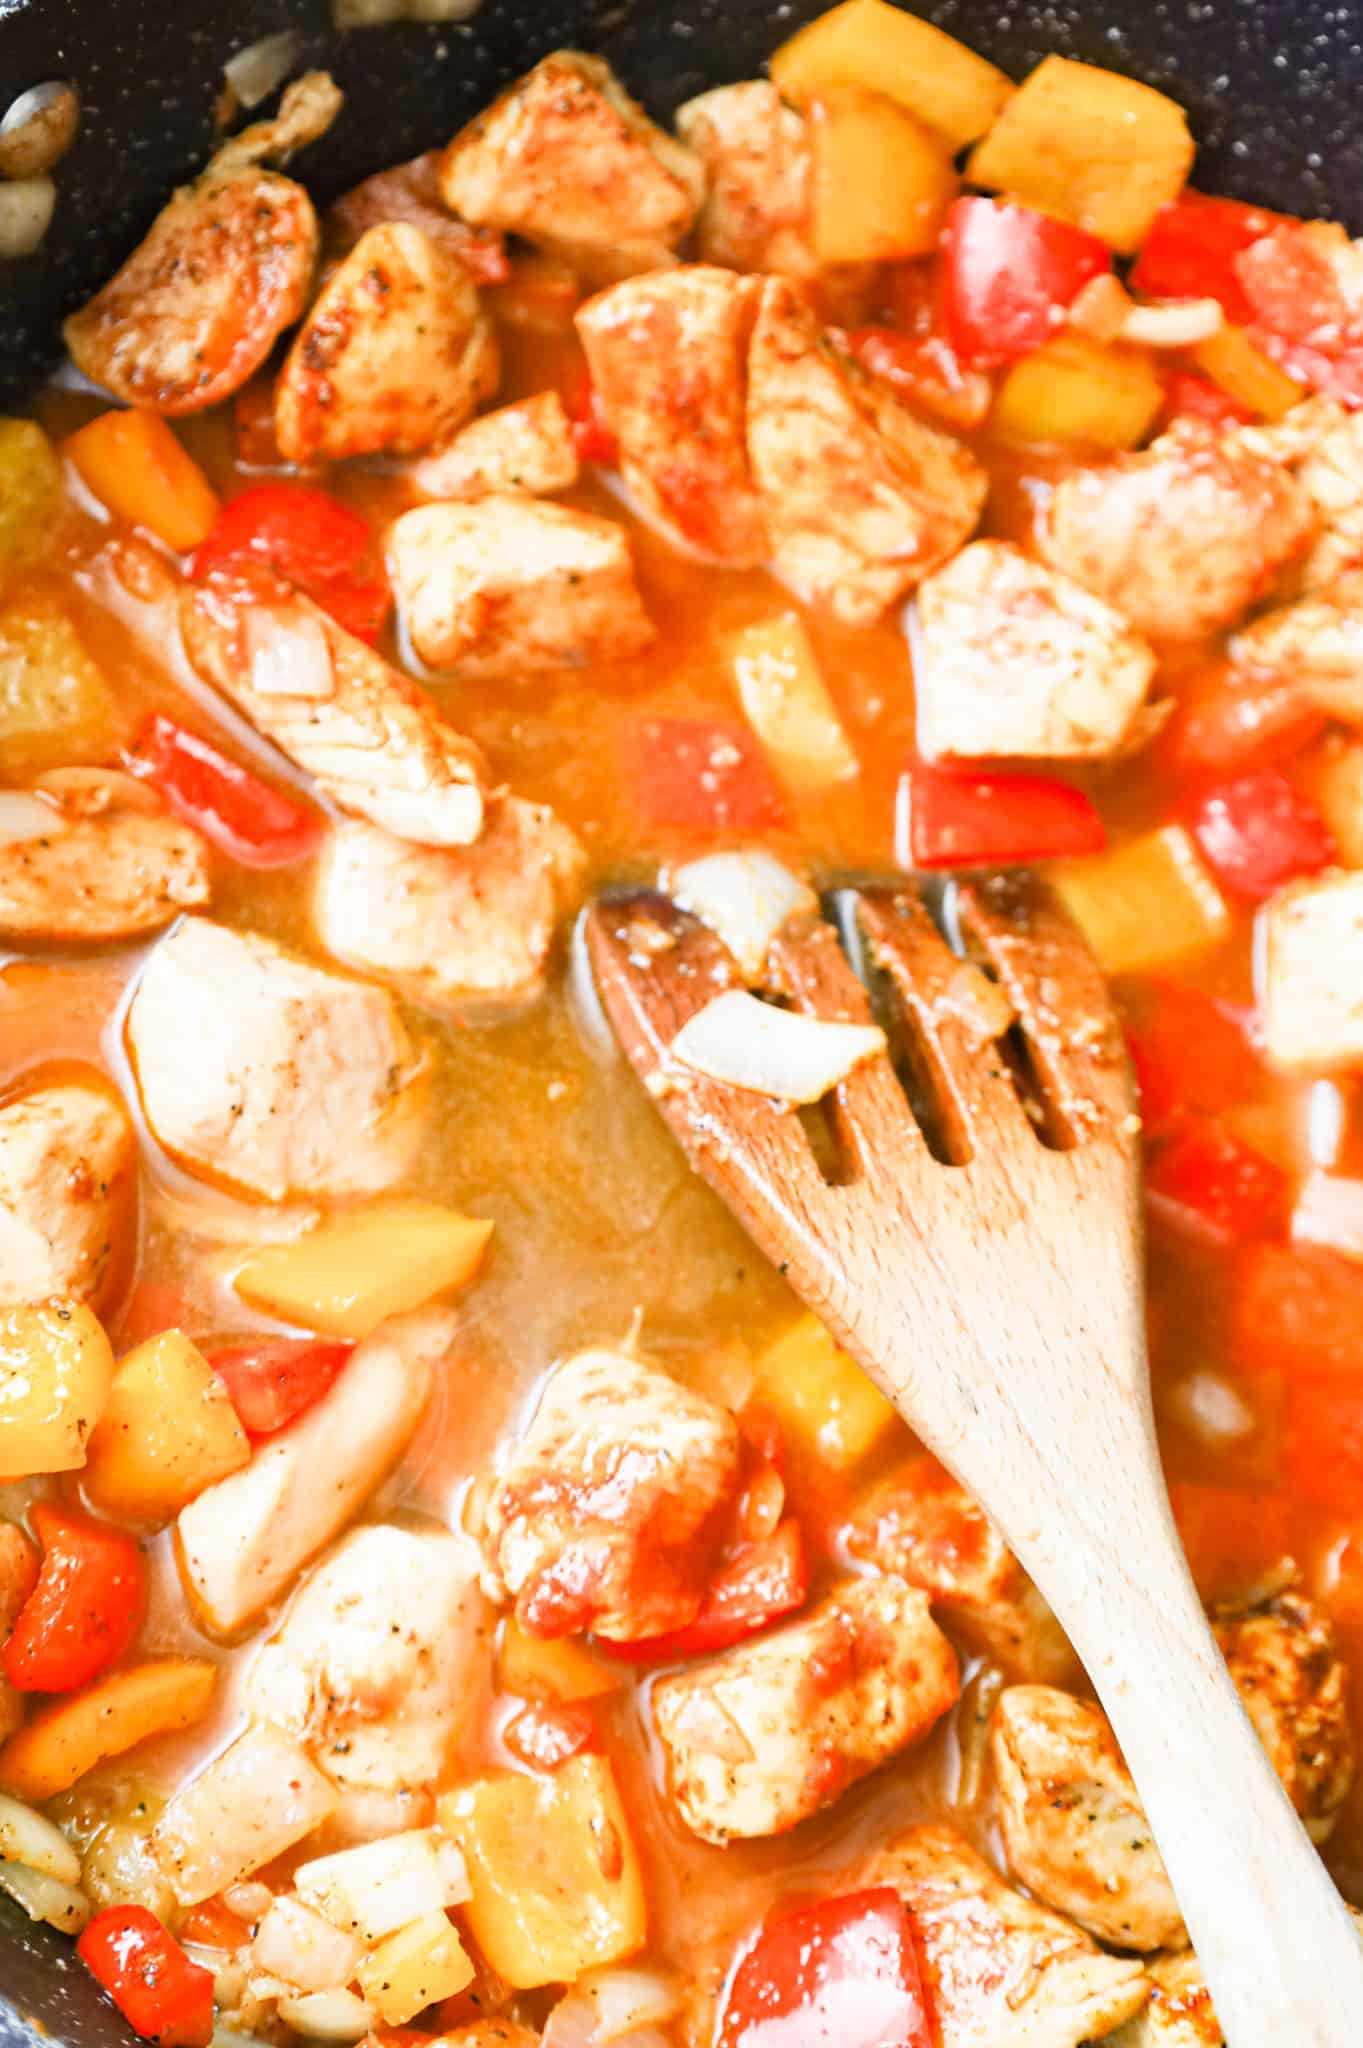 chicken broth and chipotle pepper sauce added to skillet with diced pepper and chicken breast chunks in a skillet